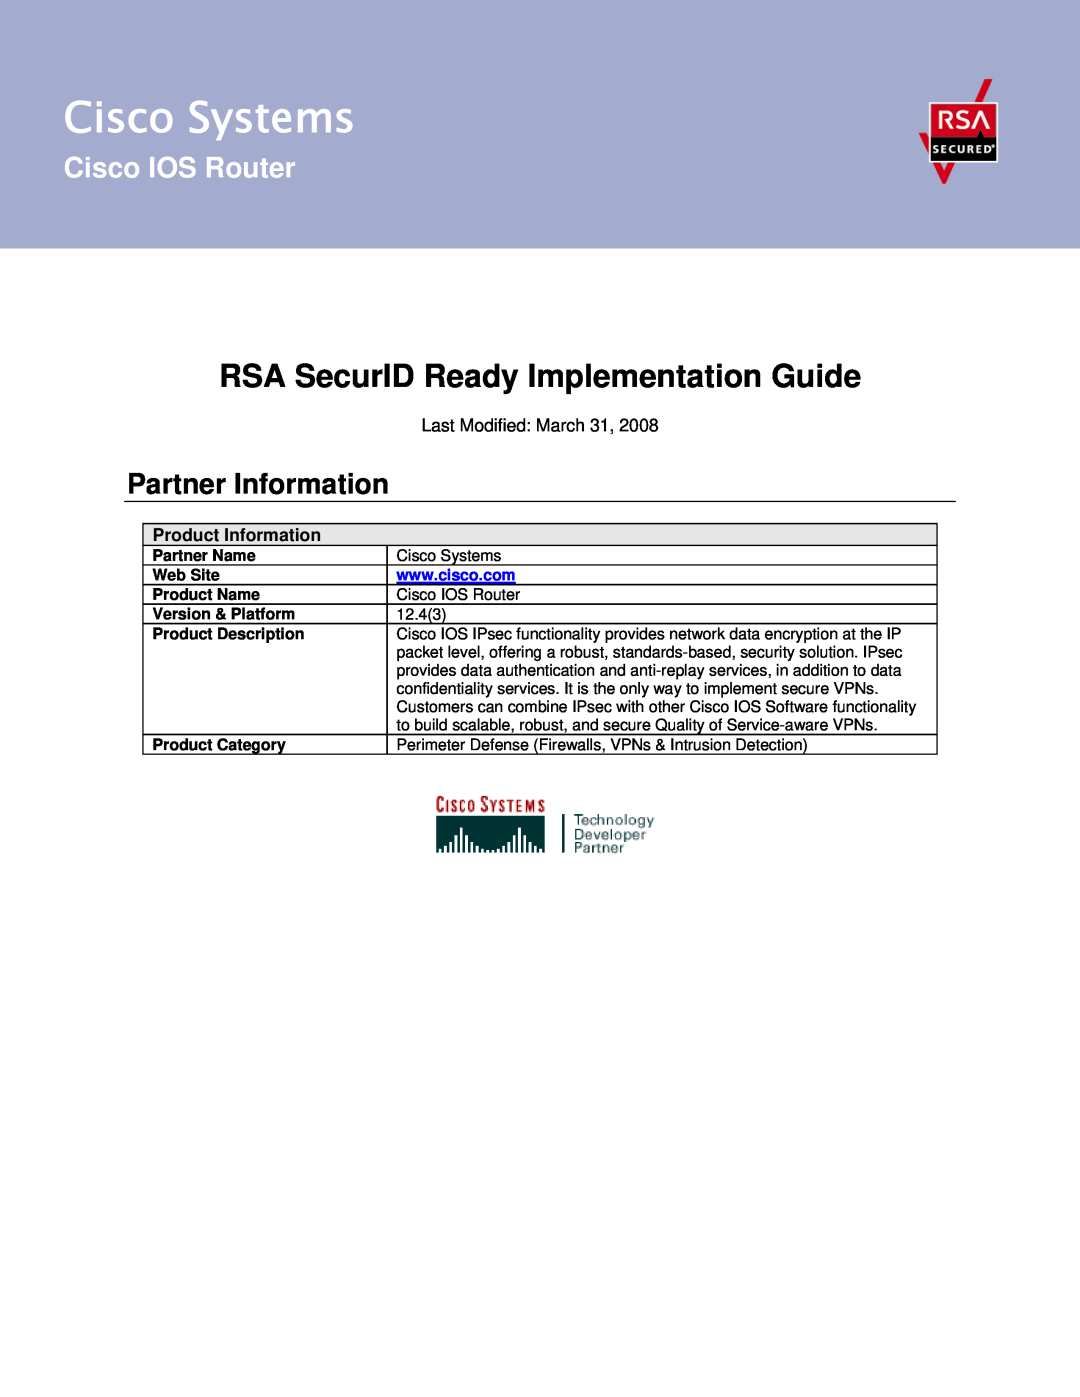 Cisco Systems IOS Router manual Partner Information, Cisco Systems, RSA SecurID Ready Implementation Guide, Partner Name 